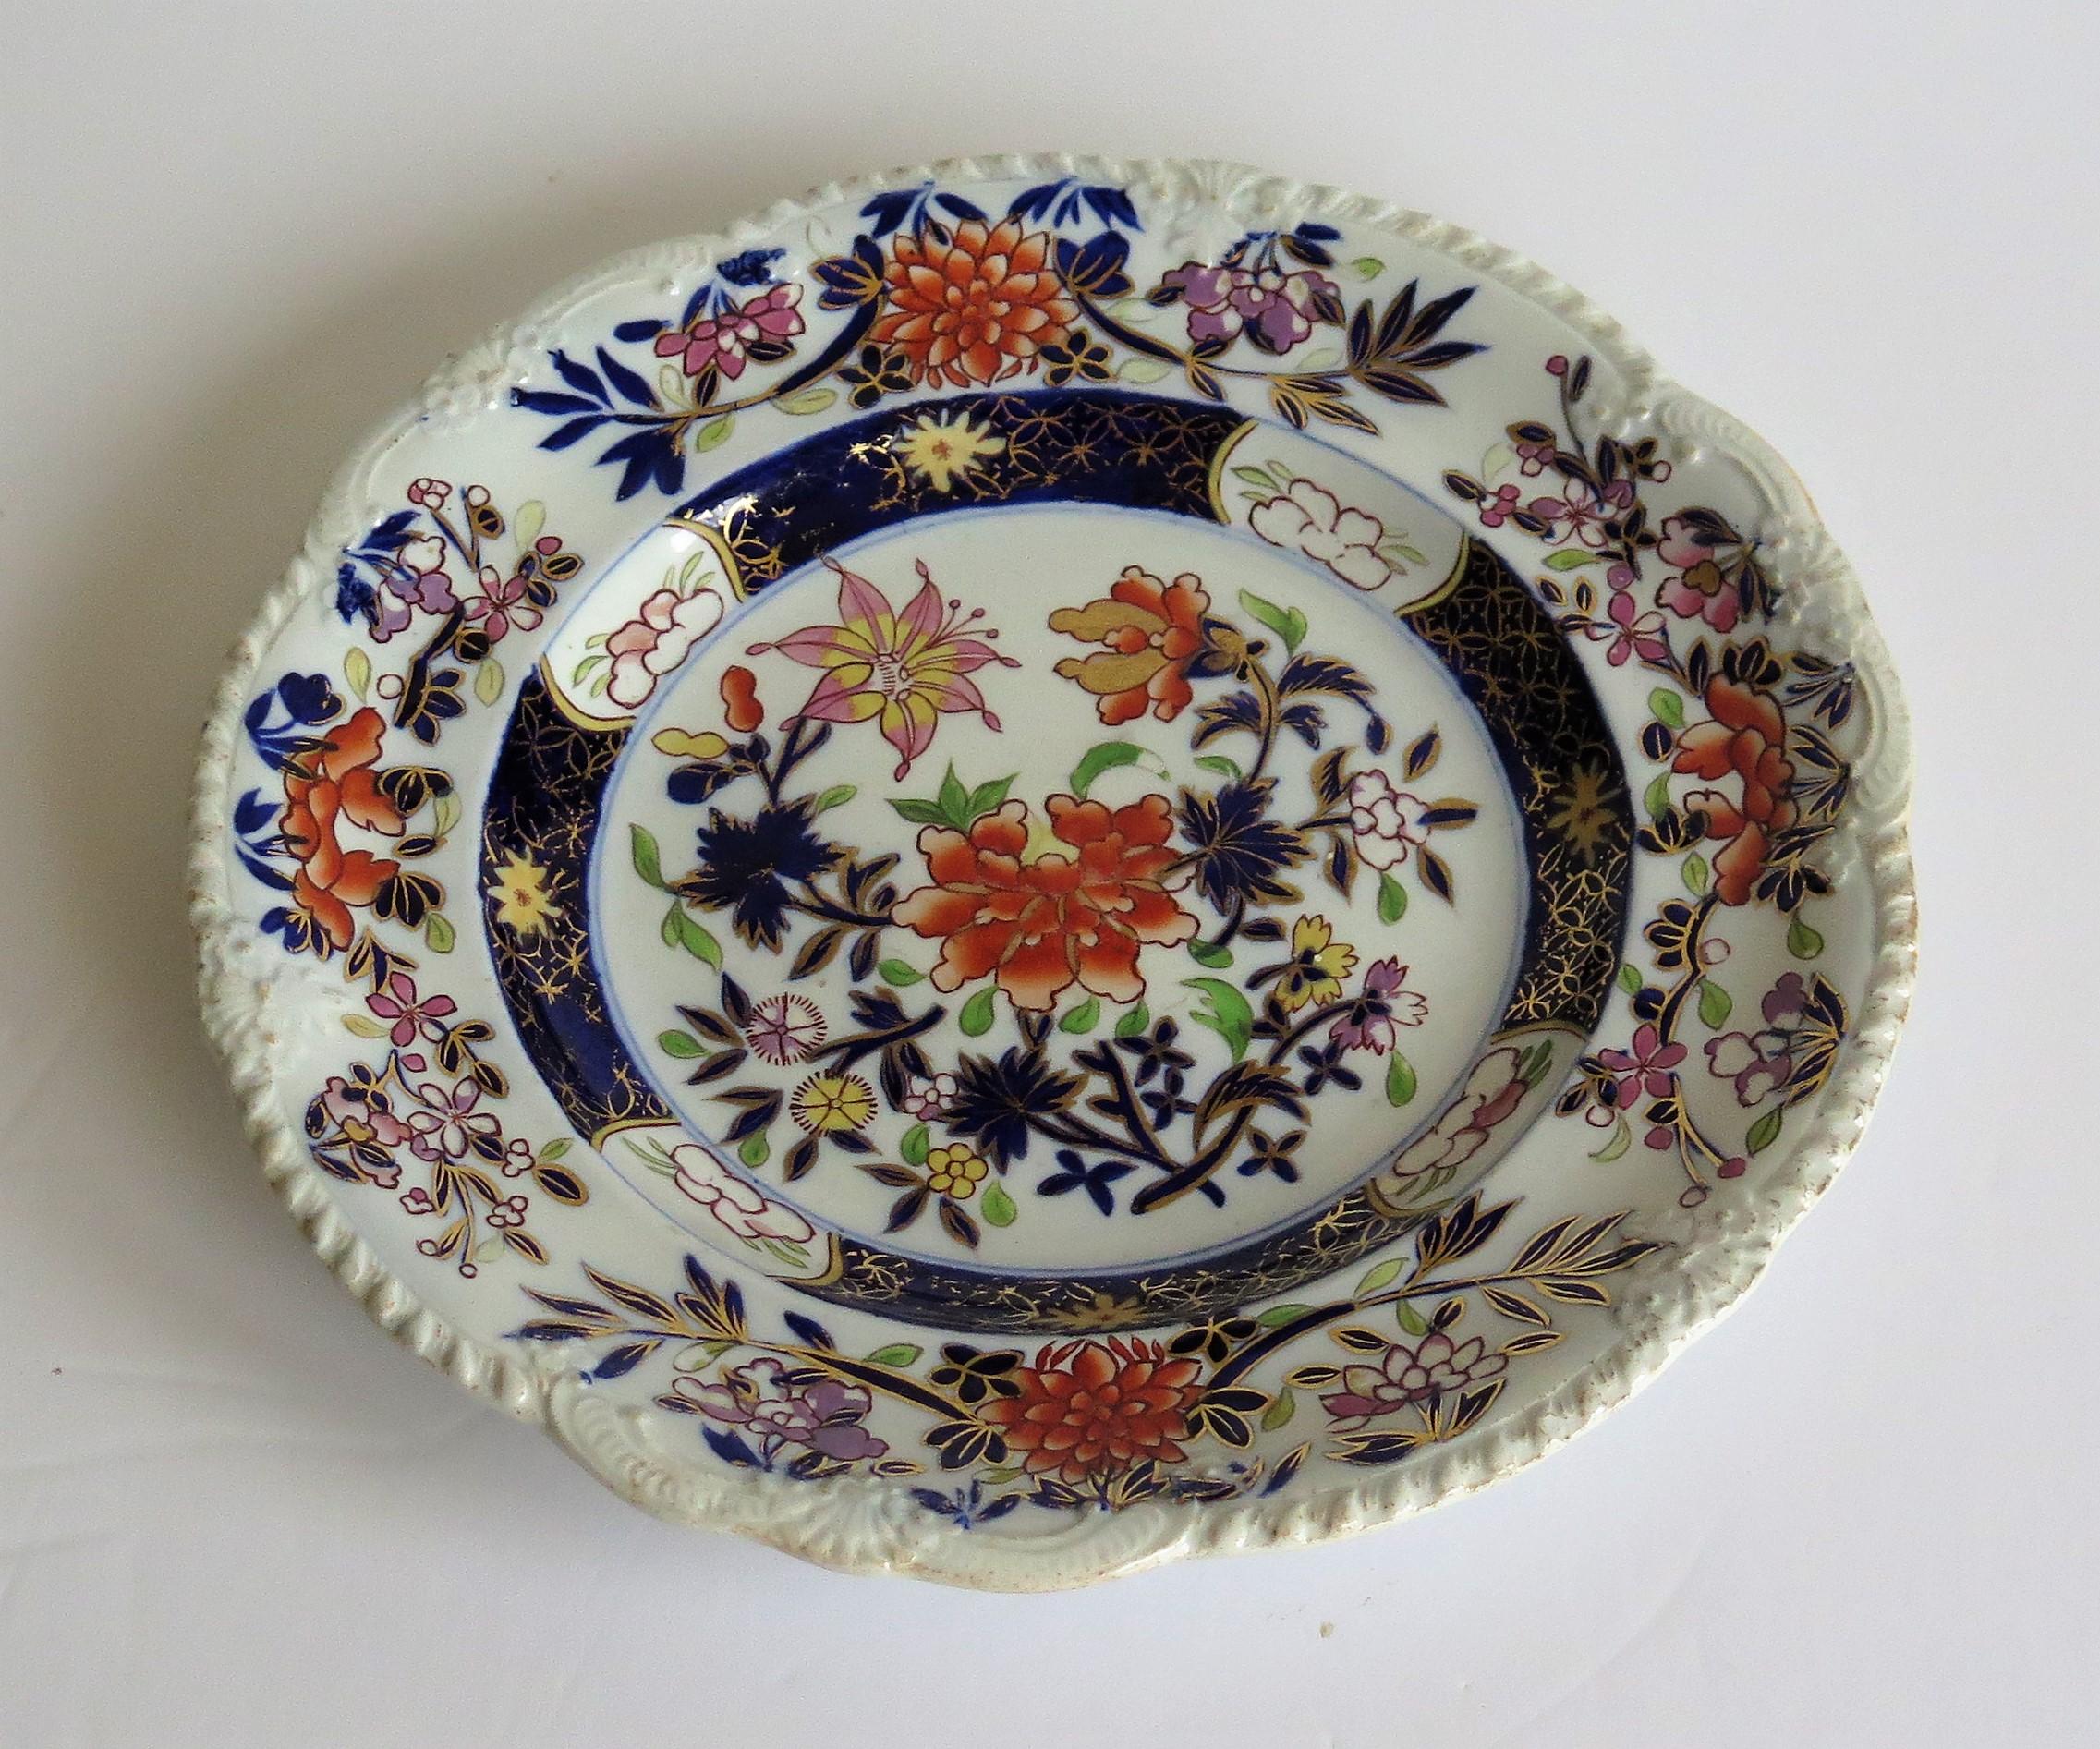 19th Century Early Mason's Ironstone Desert Plate in Heavily Floral Japan Pattern, circa 1815